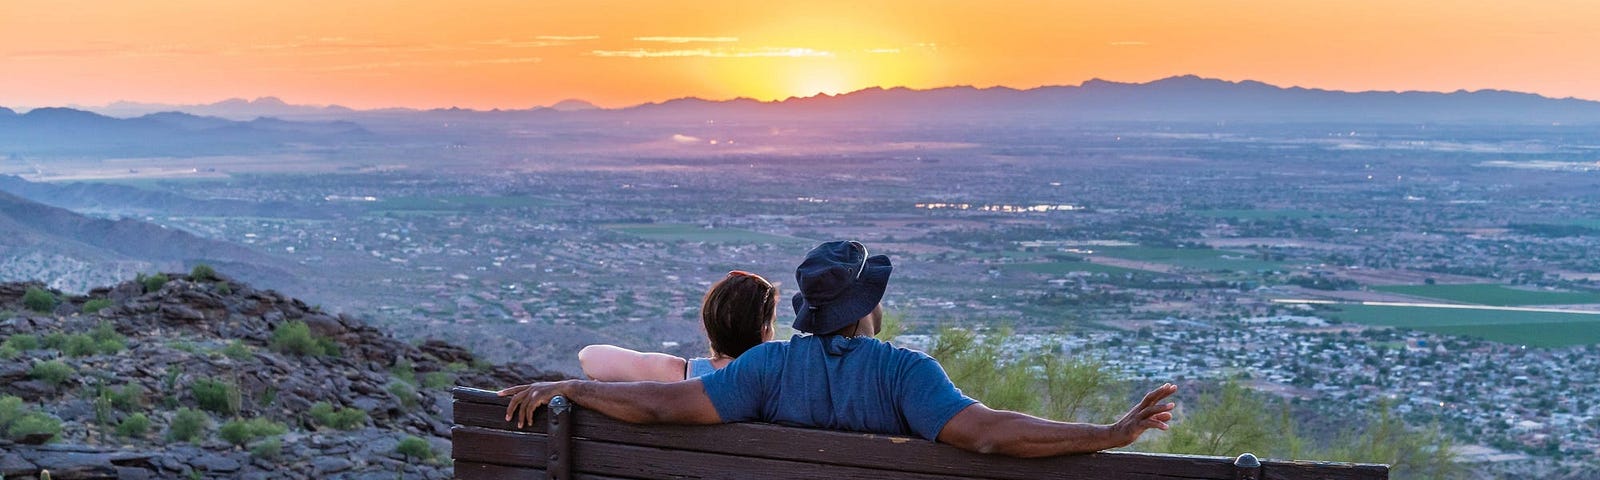 Two people sitting on a bench looking at the sunset.